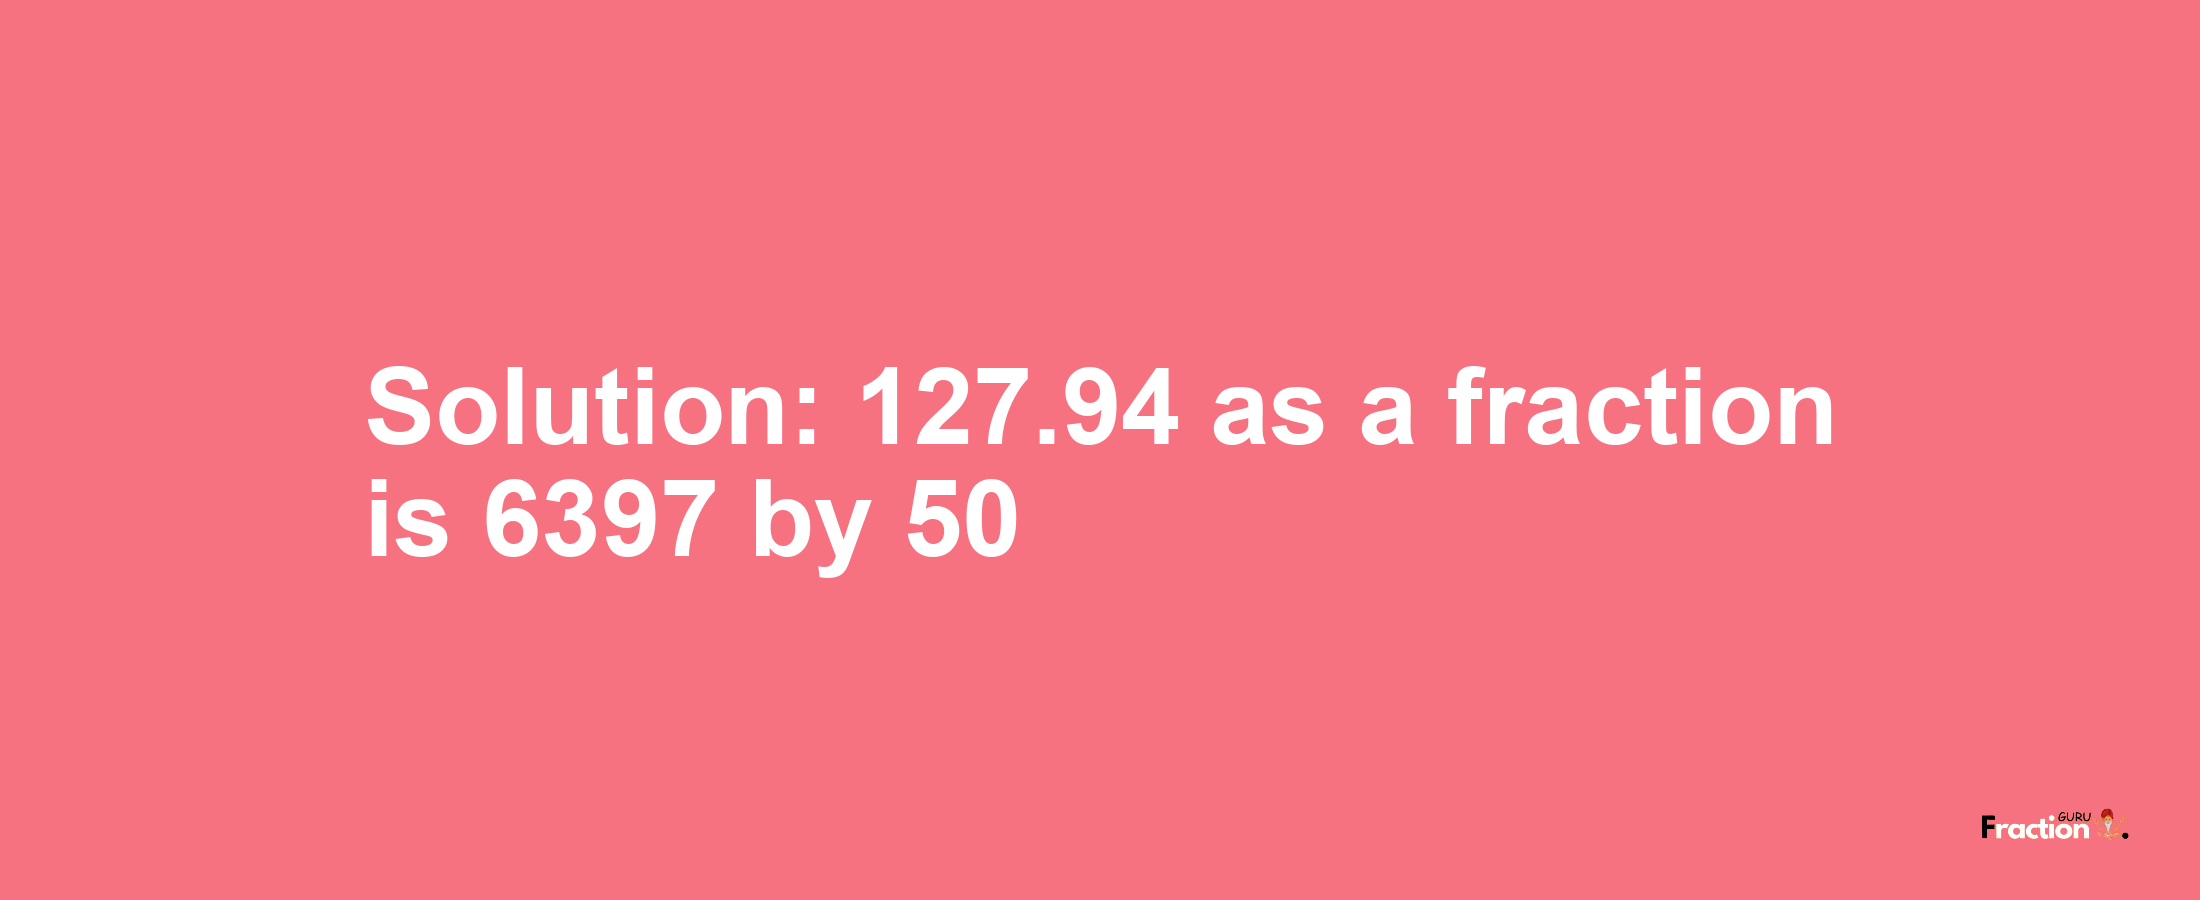 Solution:127.94 as a fraction is 6397/50